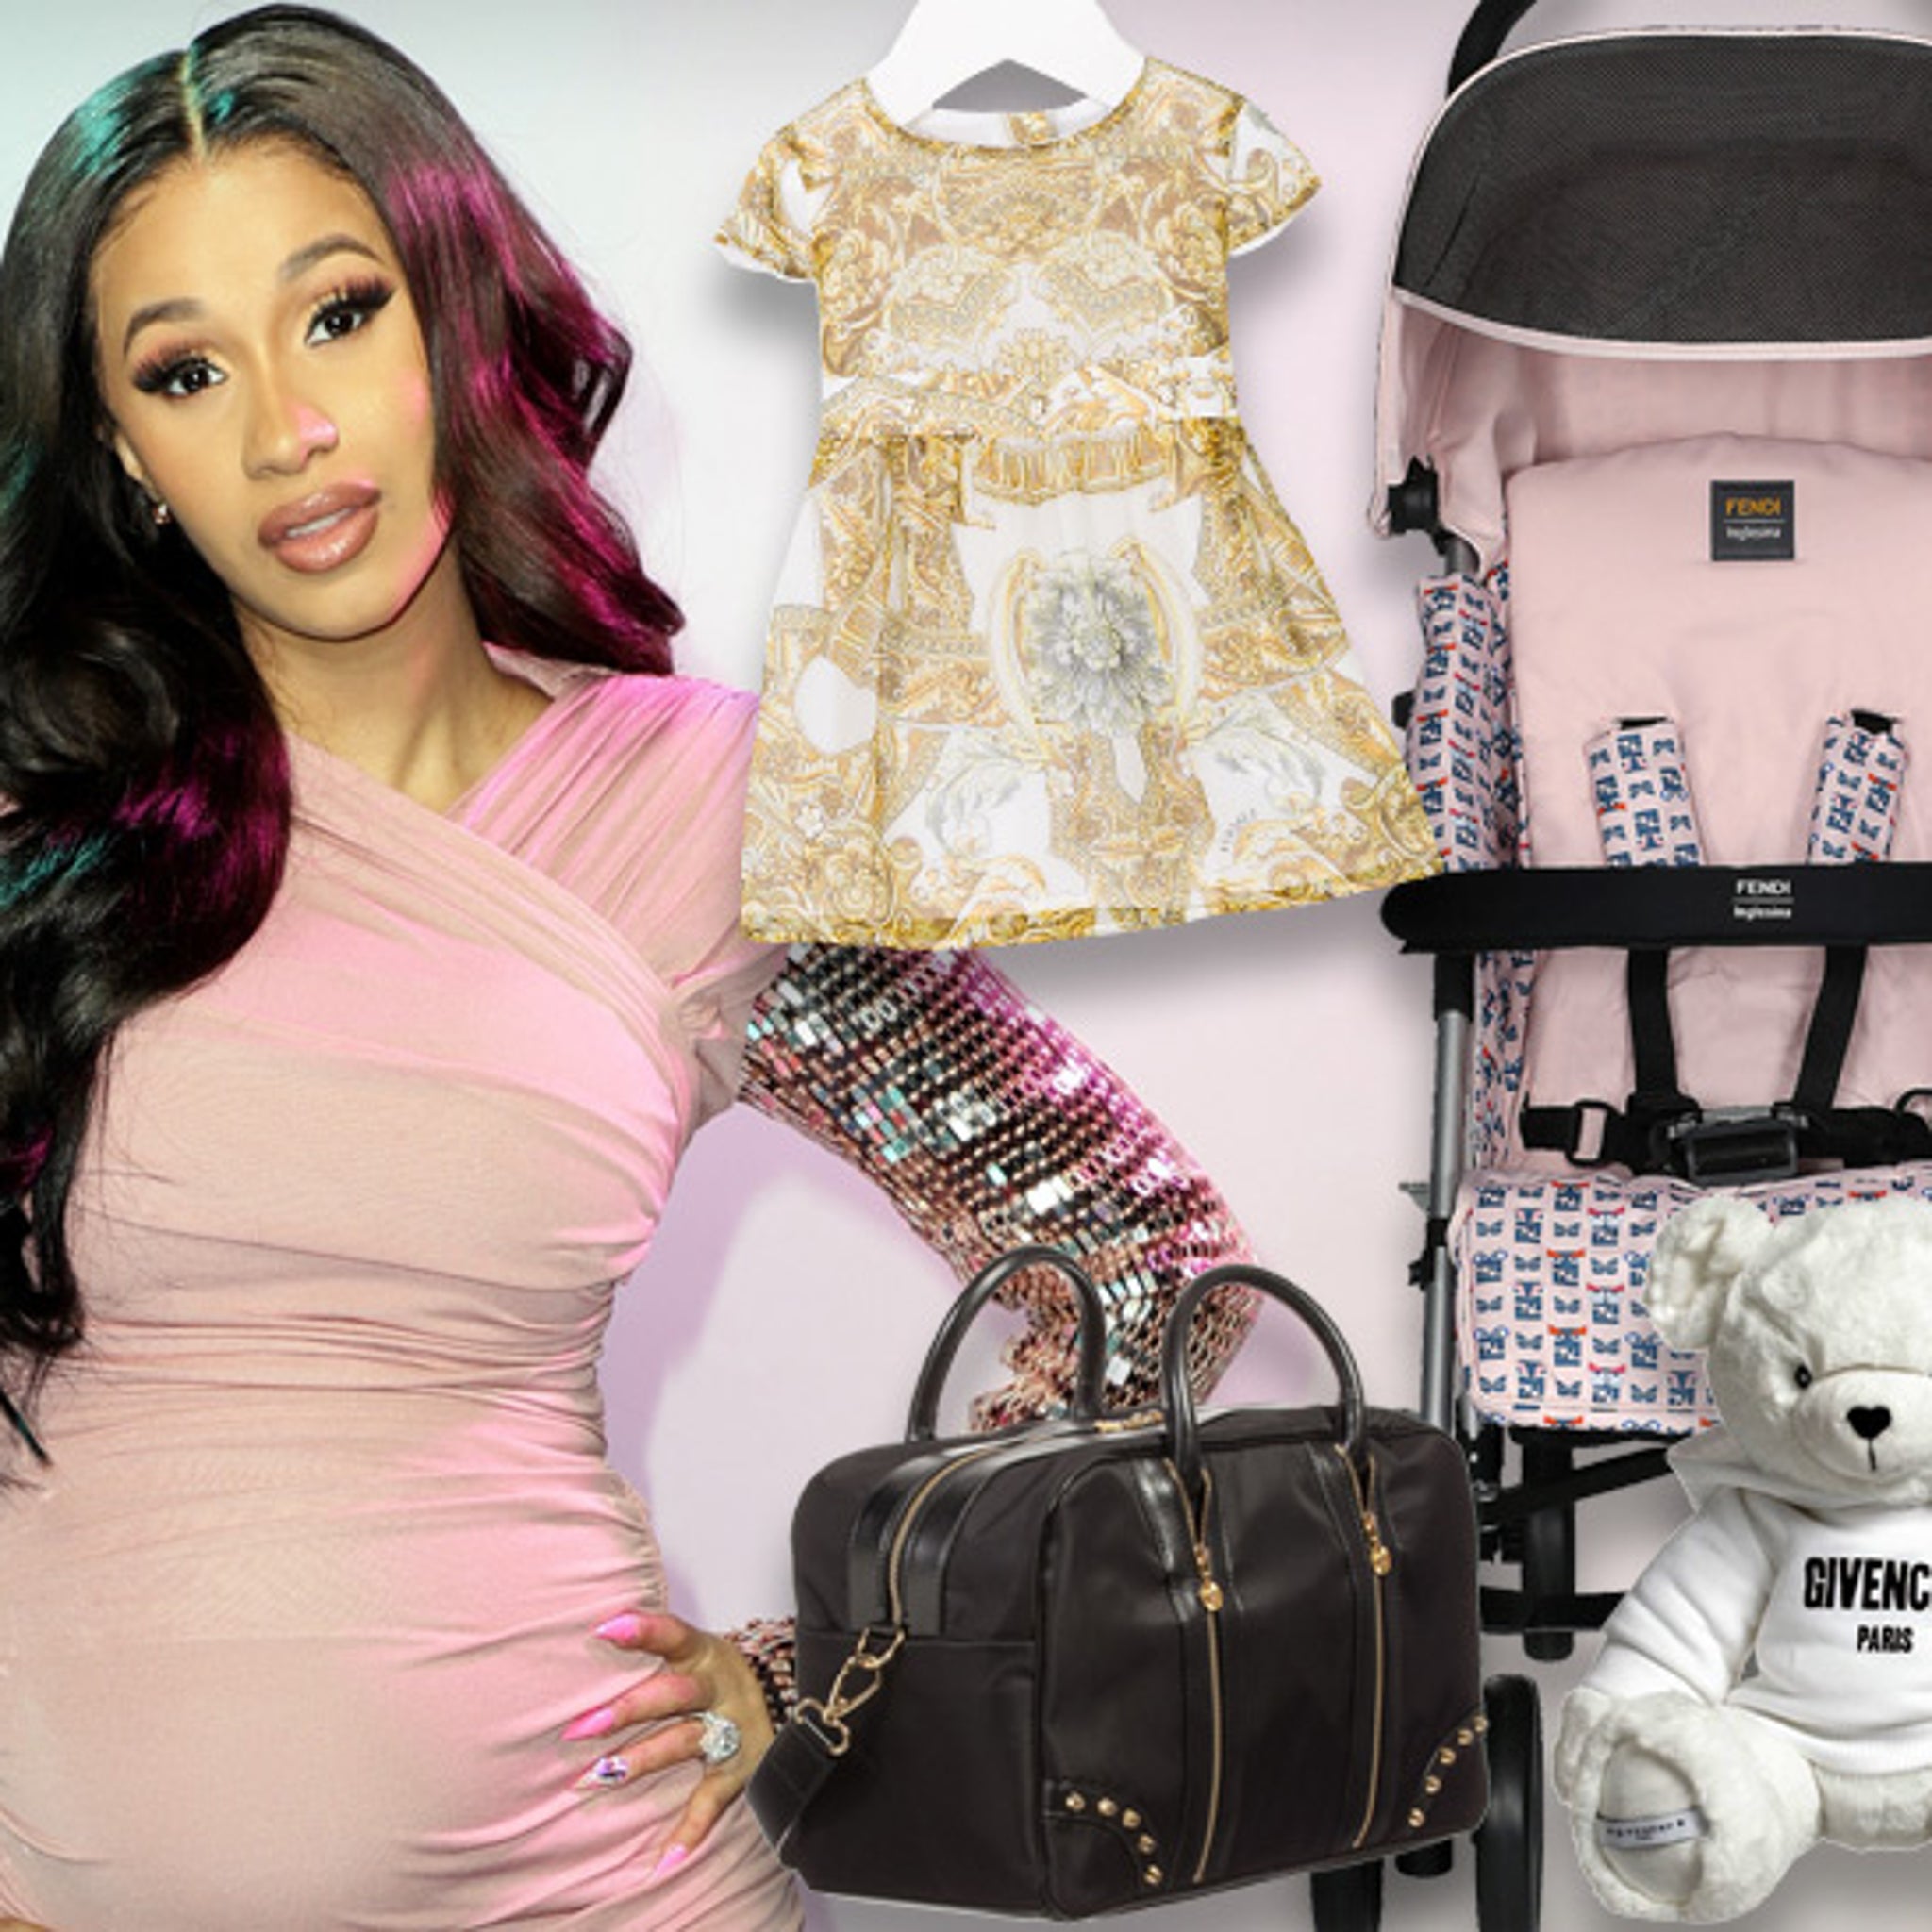 Cardi B's Daughter Wasn't Thrilled To Be Dressed In All Gucci